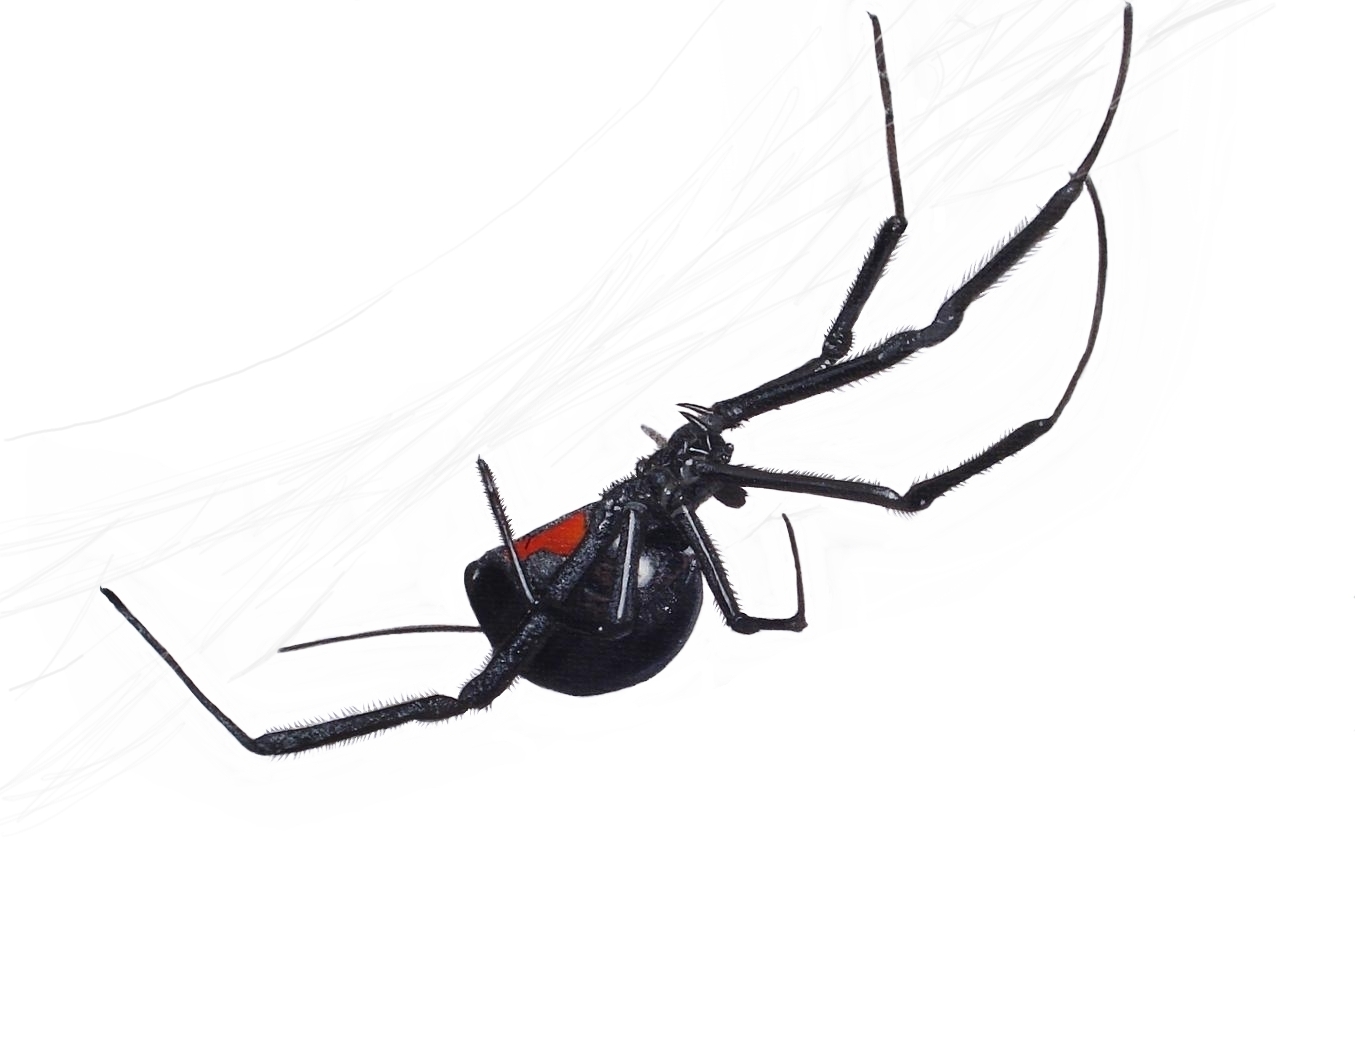 Clip Arts Related To : black widow spider silhouette png. view all Black Wi...